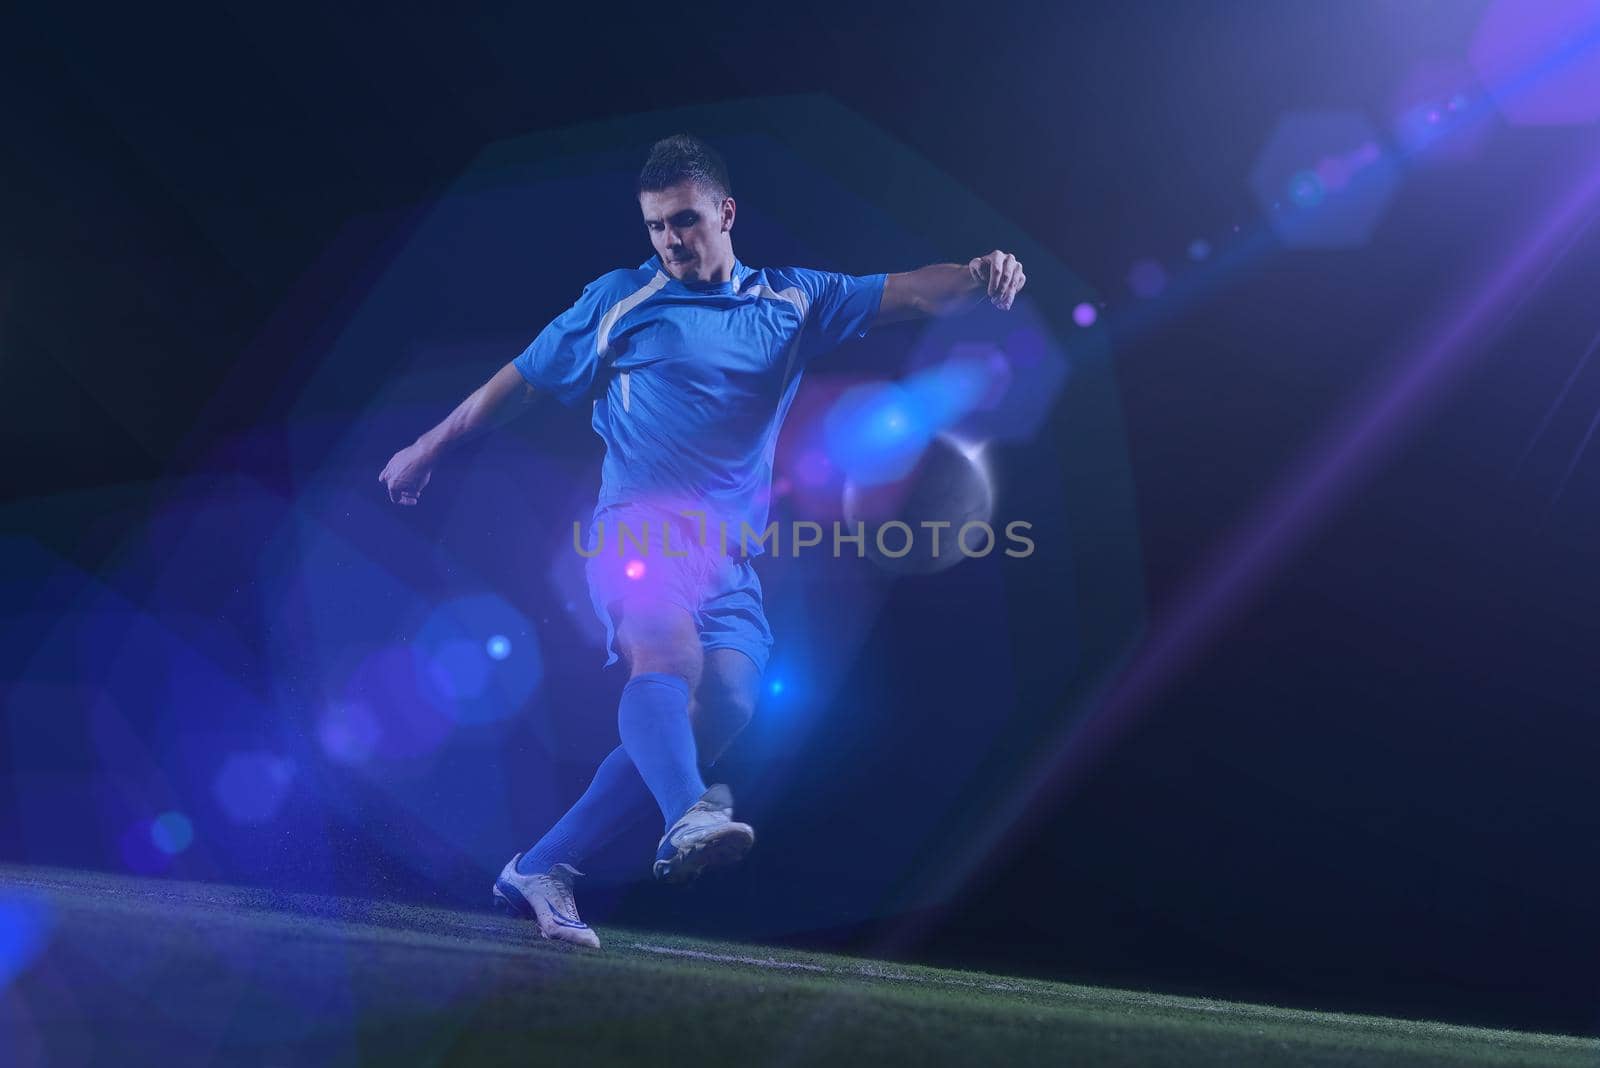 soccer player by dotshock